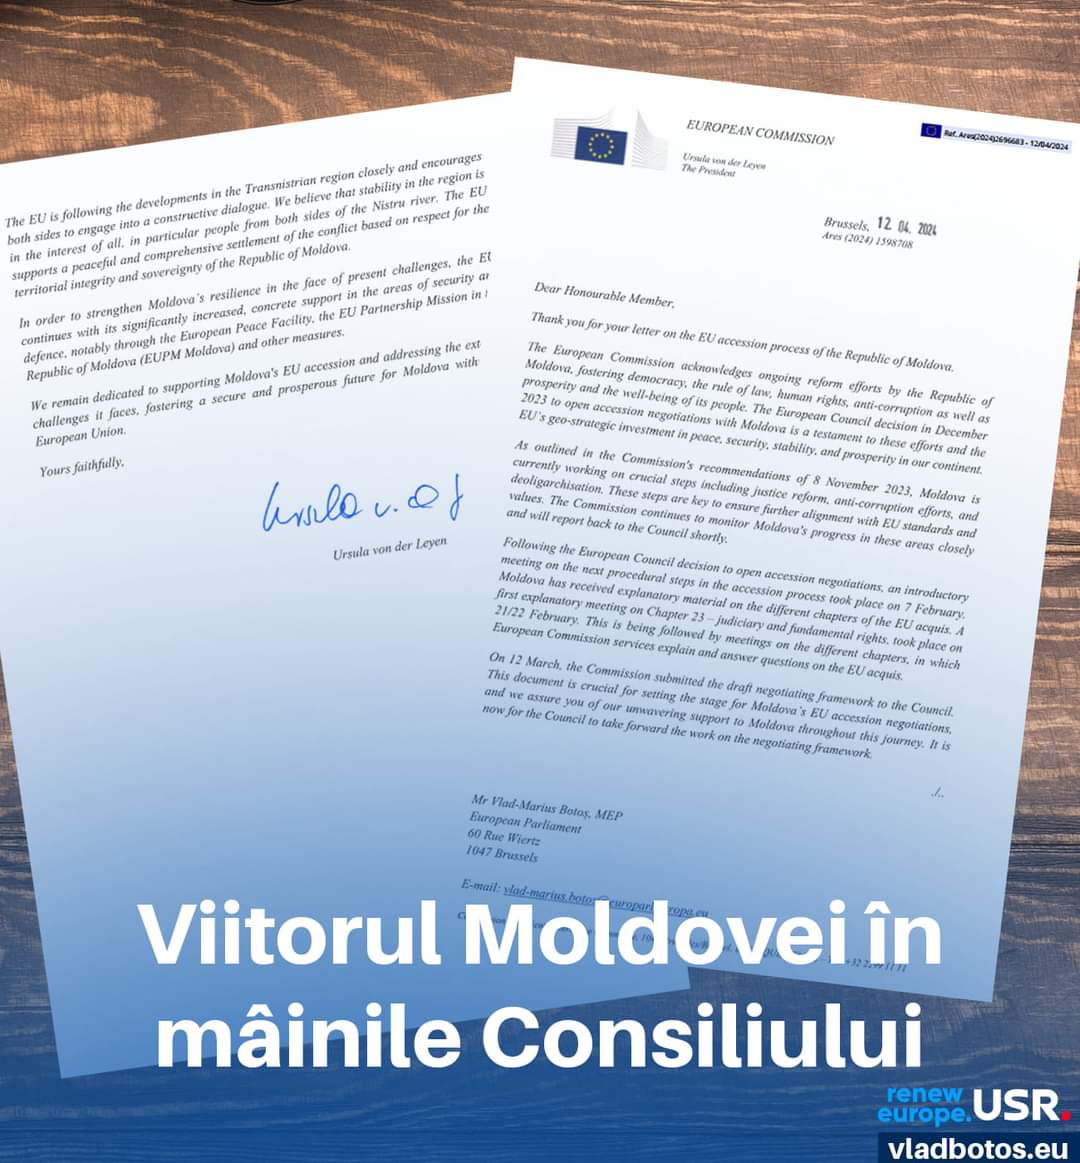 Moldova needs urgent EU support. I reached out to the European Commission for updates on their accession process. Despite Moldova's progress, Council delays are hindering their path. Romania's proactive stance is vital for Moldova's future in the EU.